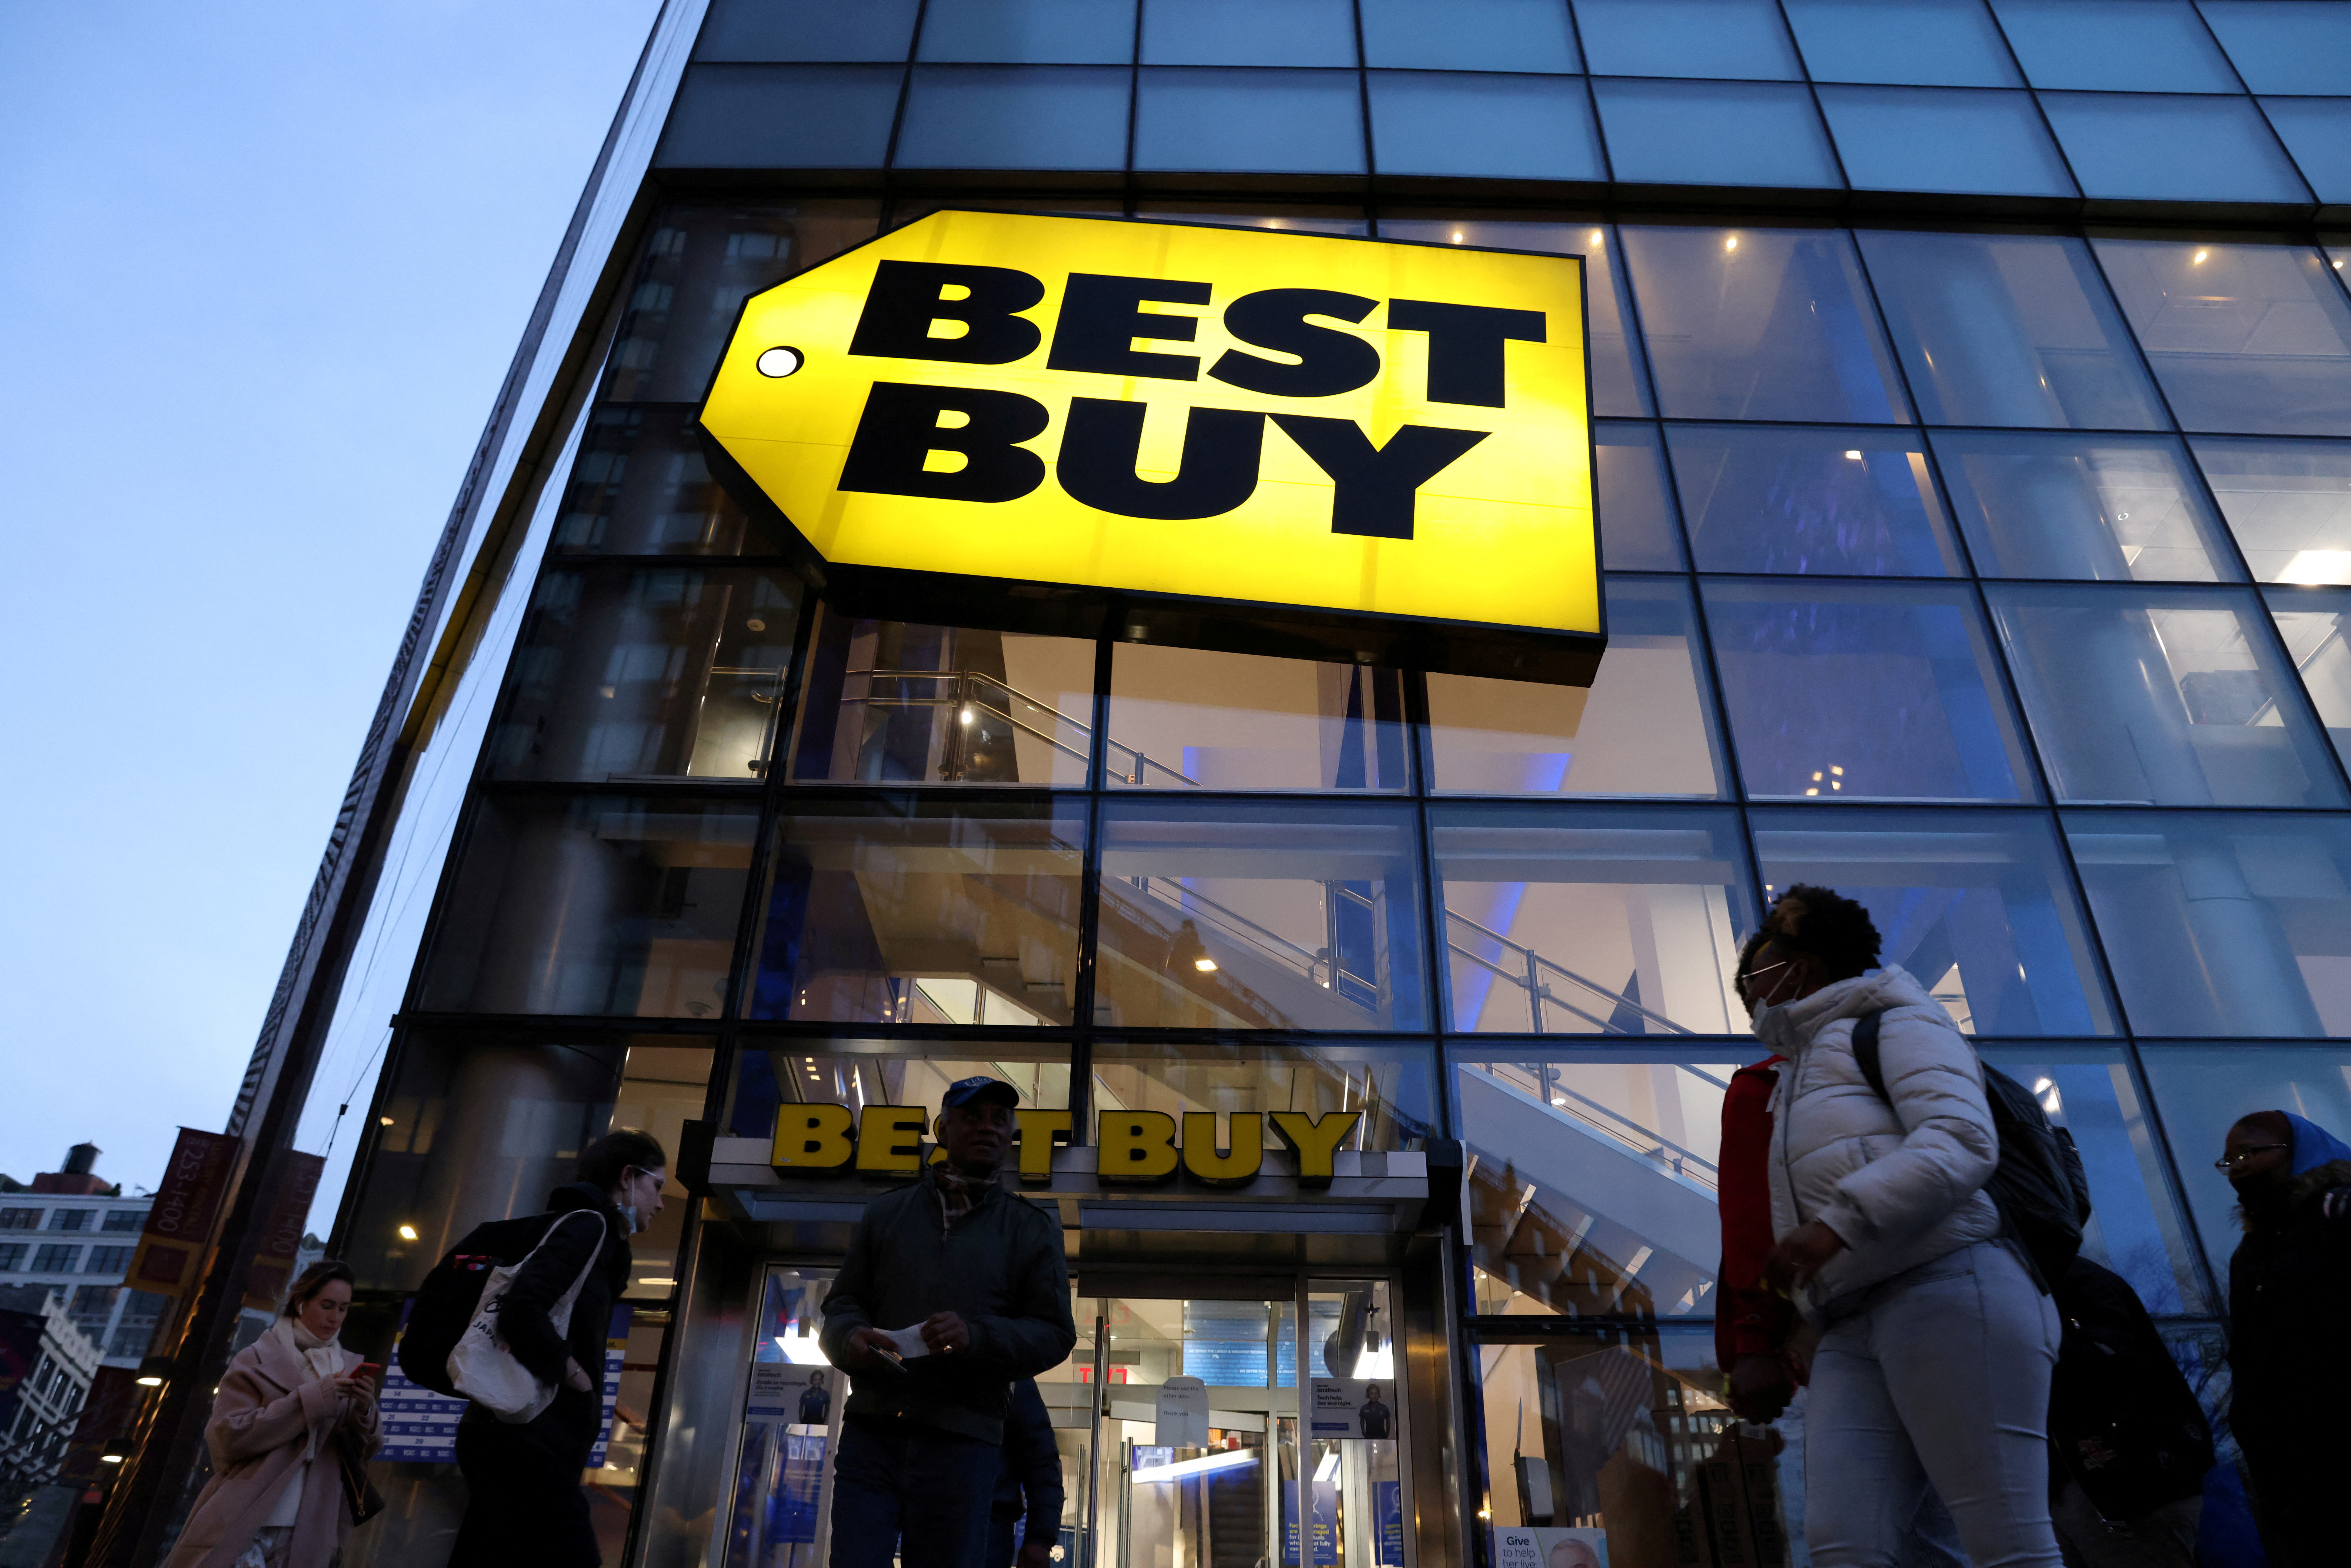 People walk past a Best Buy store in Manhattan, New York City